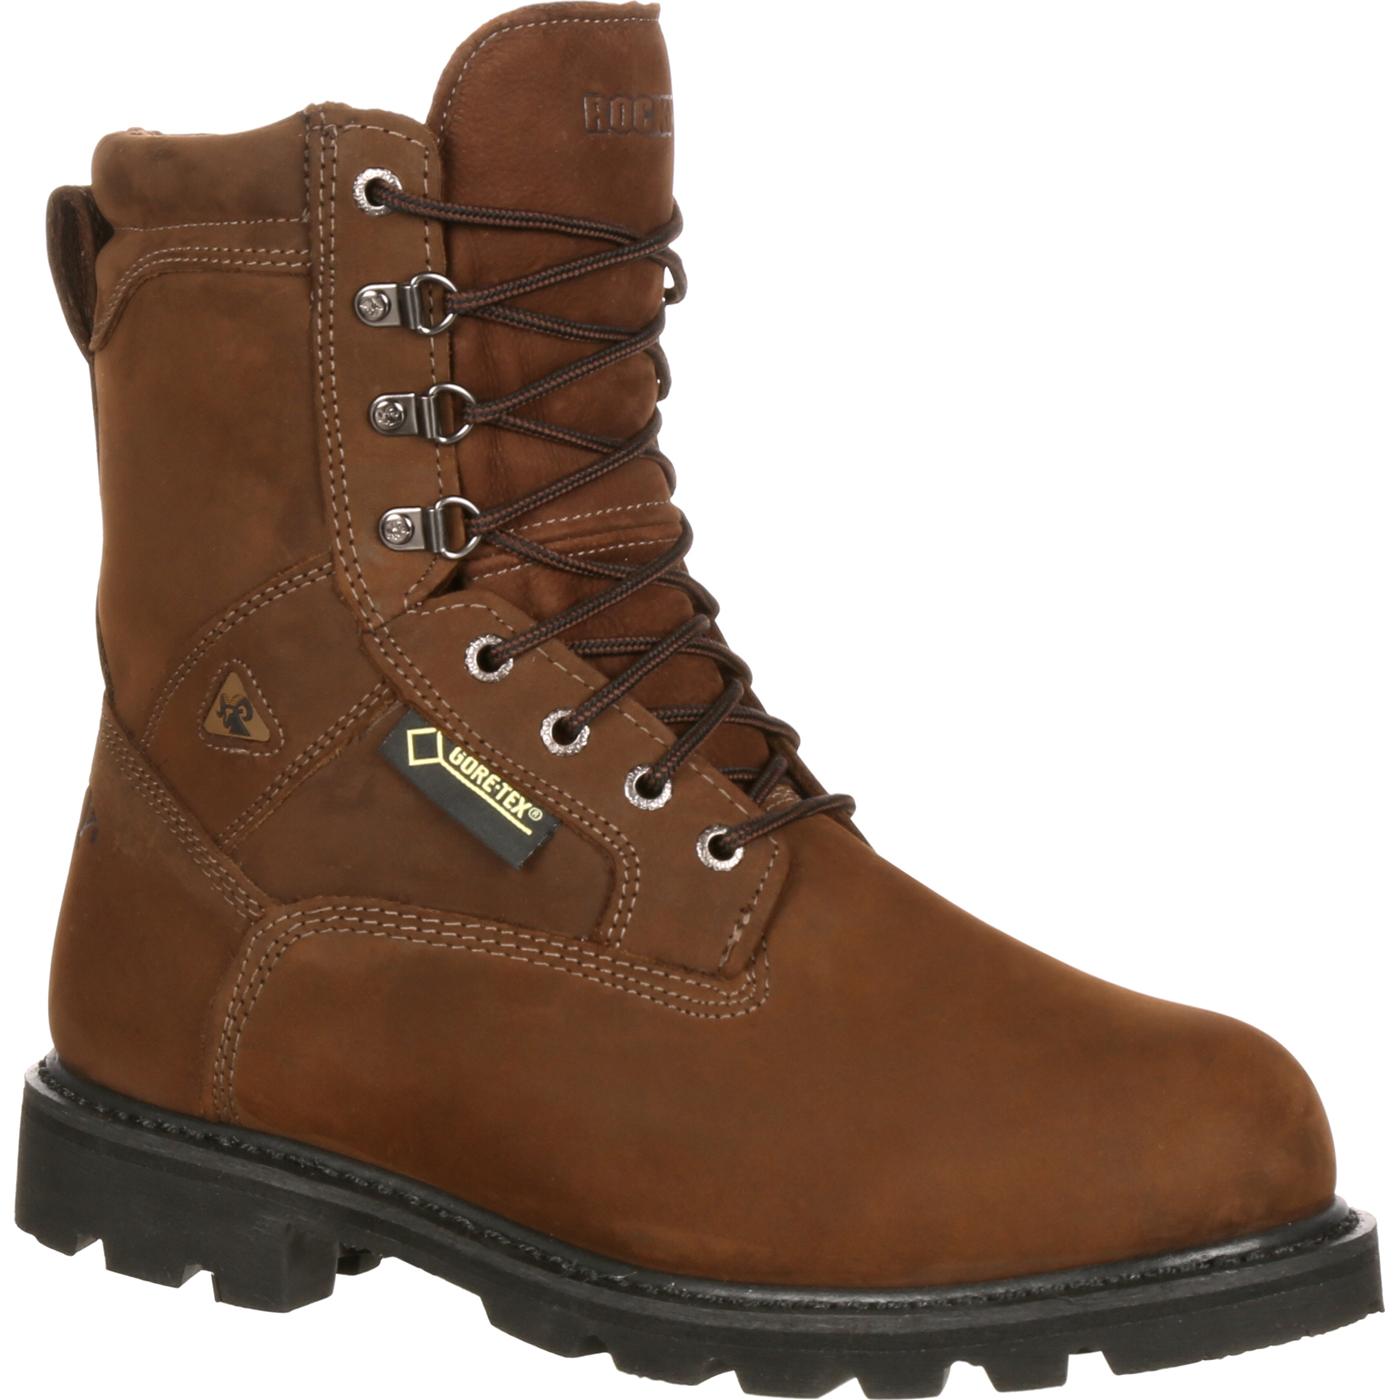 Gore Tex® Work Boots | Buy Rocky Ranger Work Boots Online at Rocky Boots